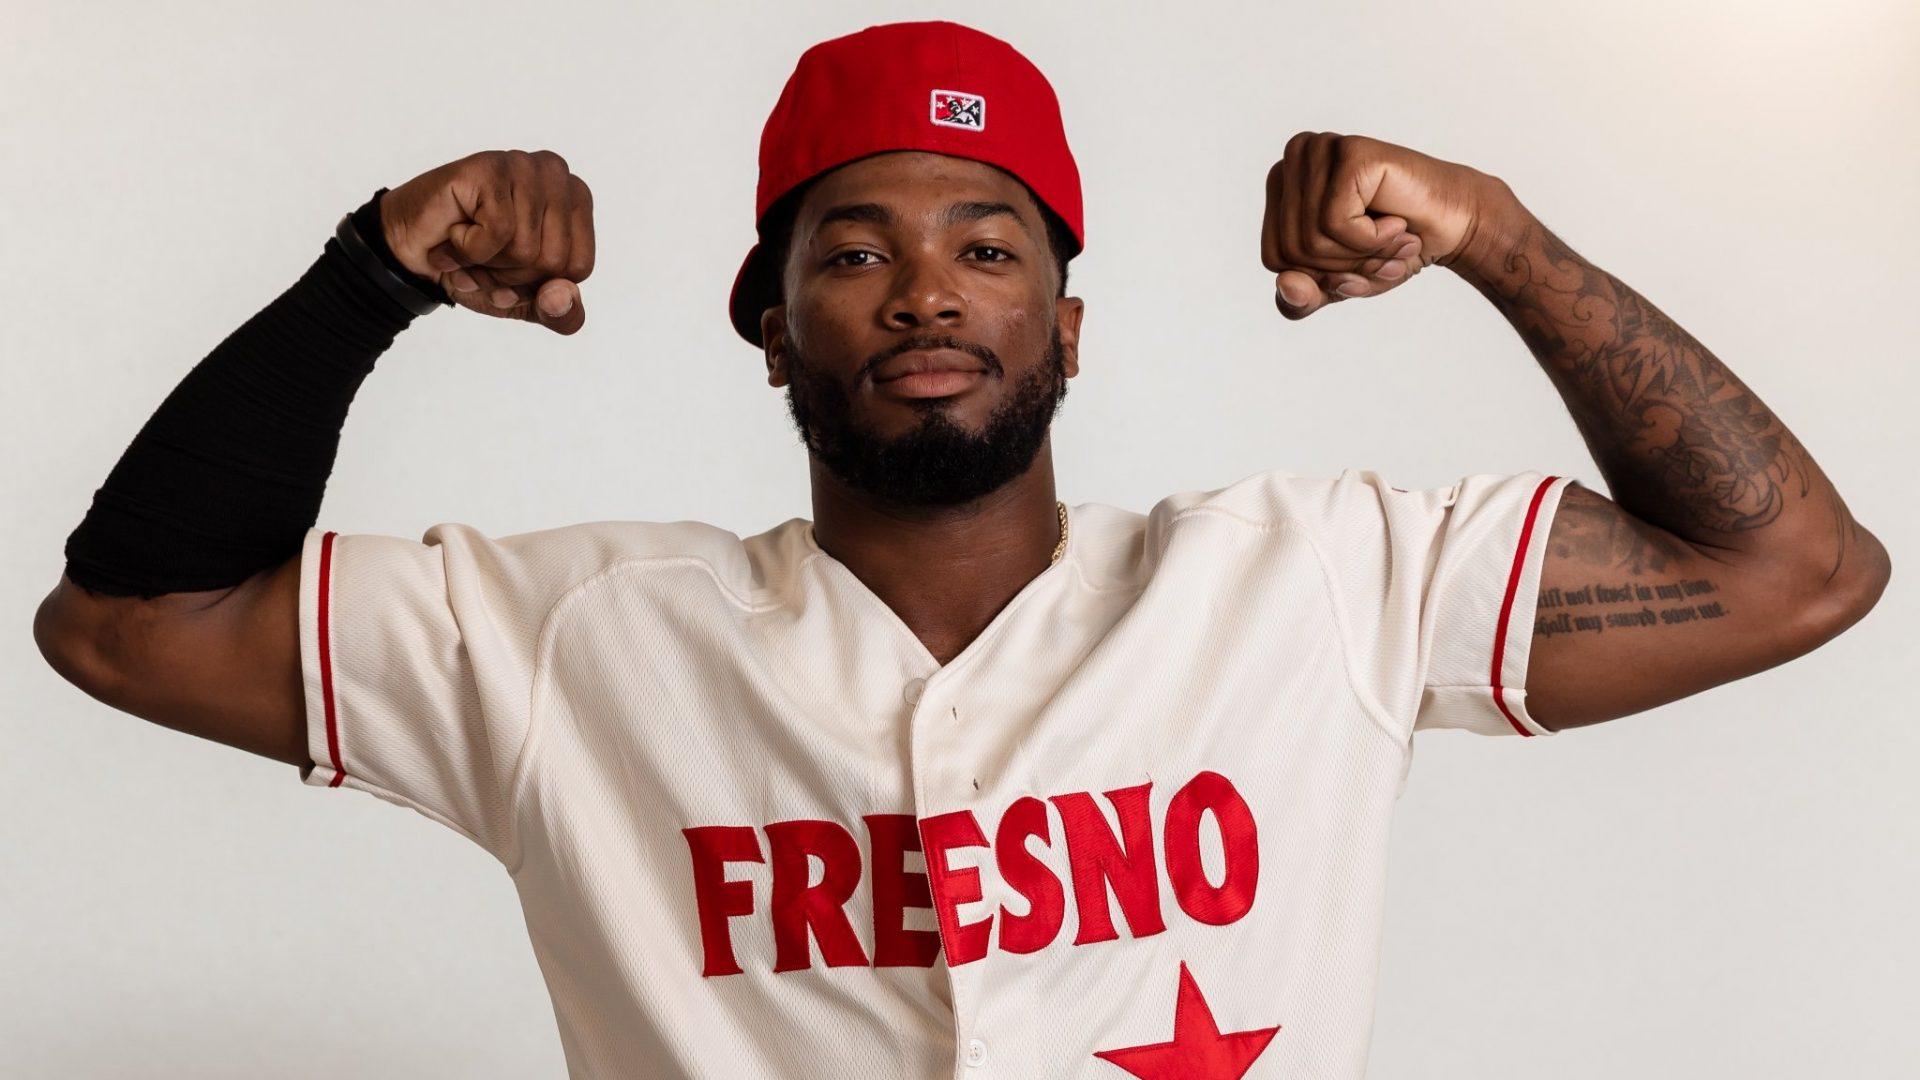 EJ Andrews Jr. spent three years at Fresno State and will start his professional career wit the Fresno Grizzlies (Photo courtesy of Aaron Pro Photography).